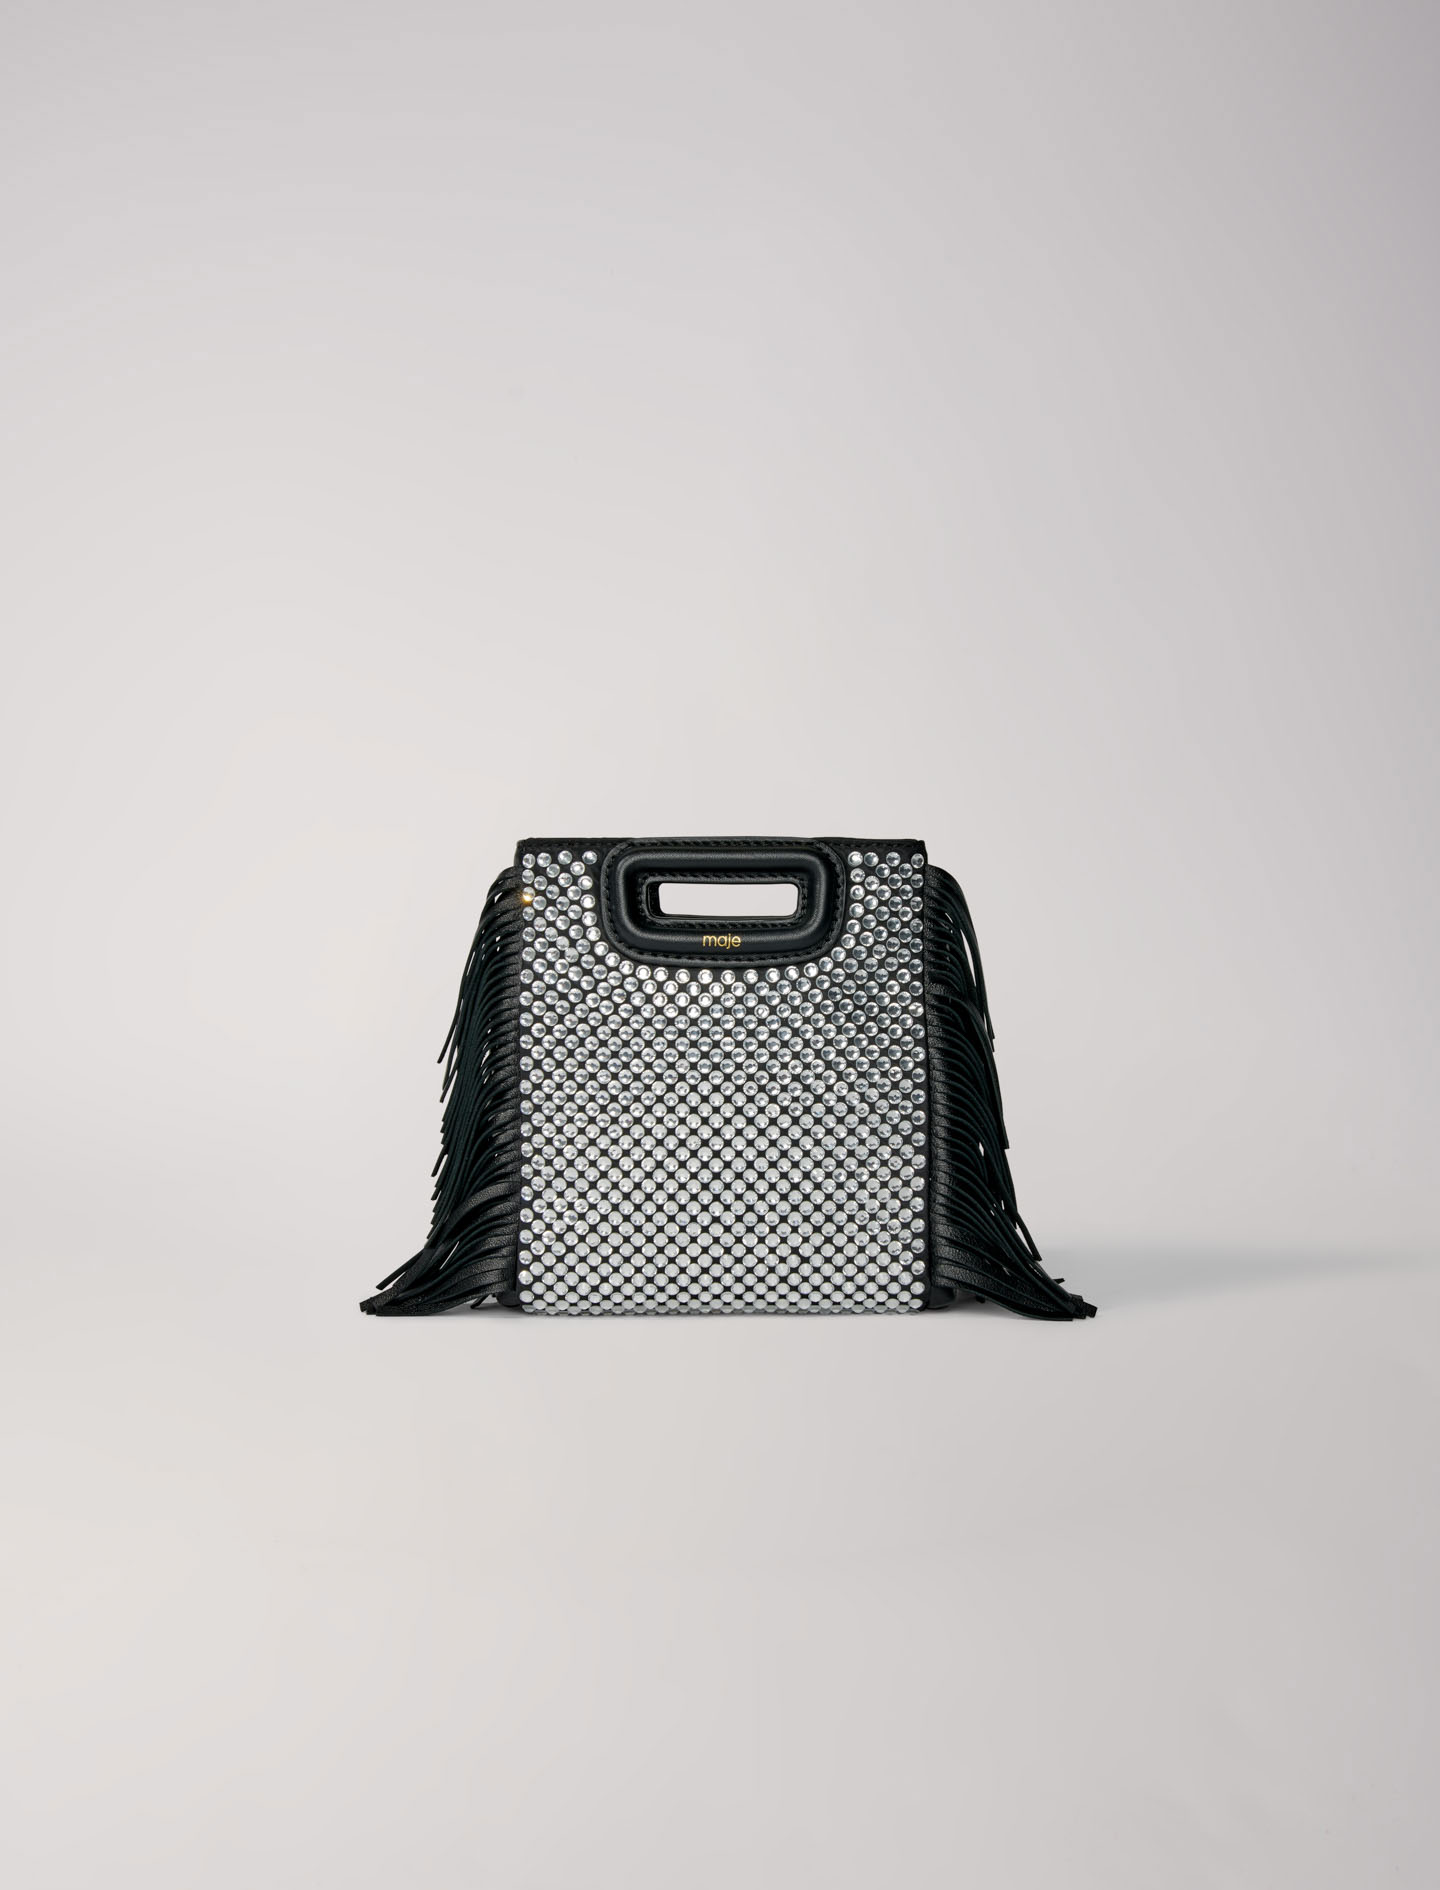 Maje Woman's polyester Lining: M mini leather bag with rhinestones for Fall/Winter, in color Black / Black